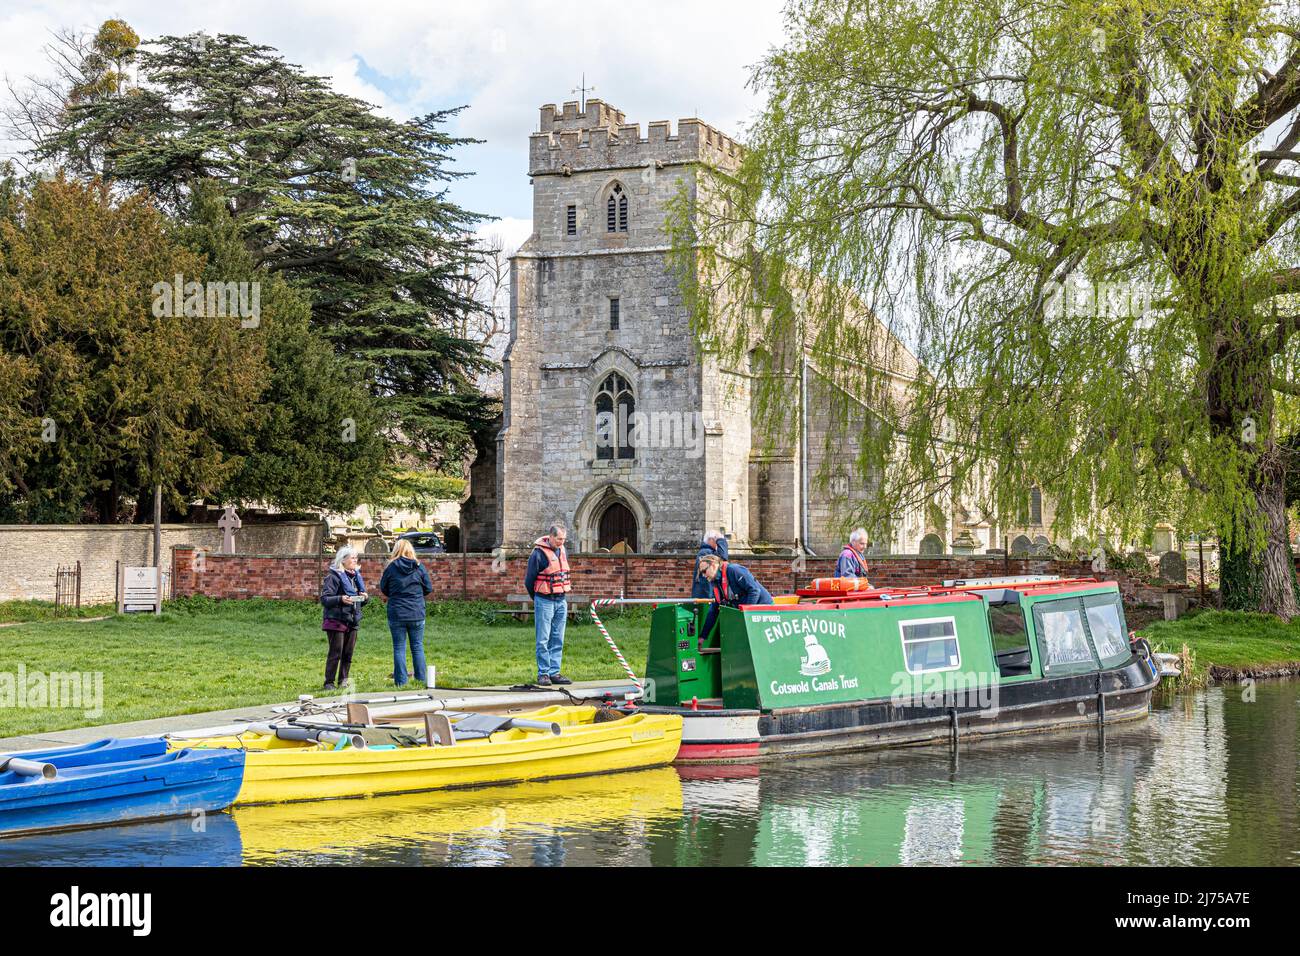 The Cotswold Canals Trust long boat Endeavour on the restored Stroudwater Canal at St Cyr's Church, Stonehouse, Gloucestershire, England UK Stock Photo